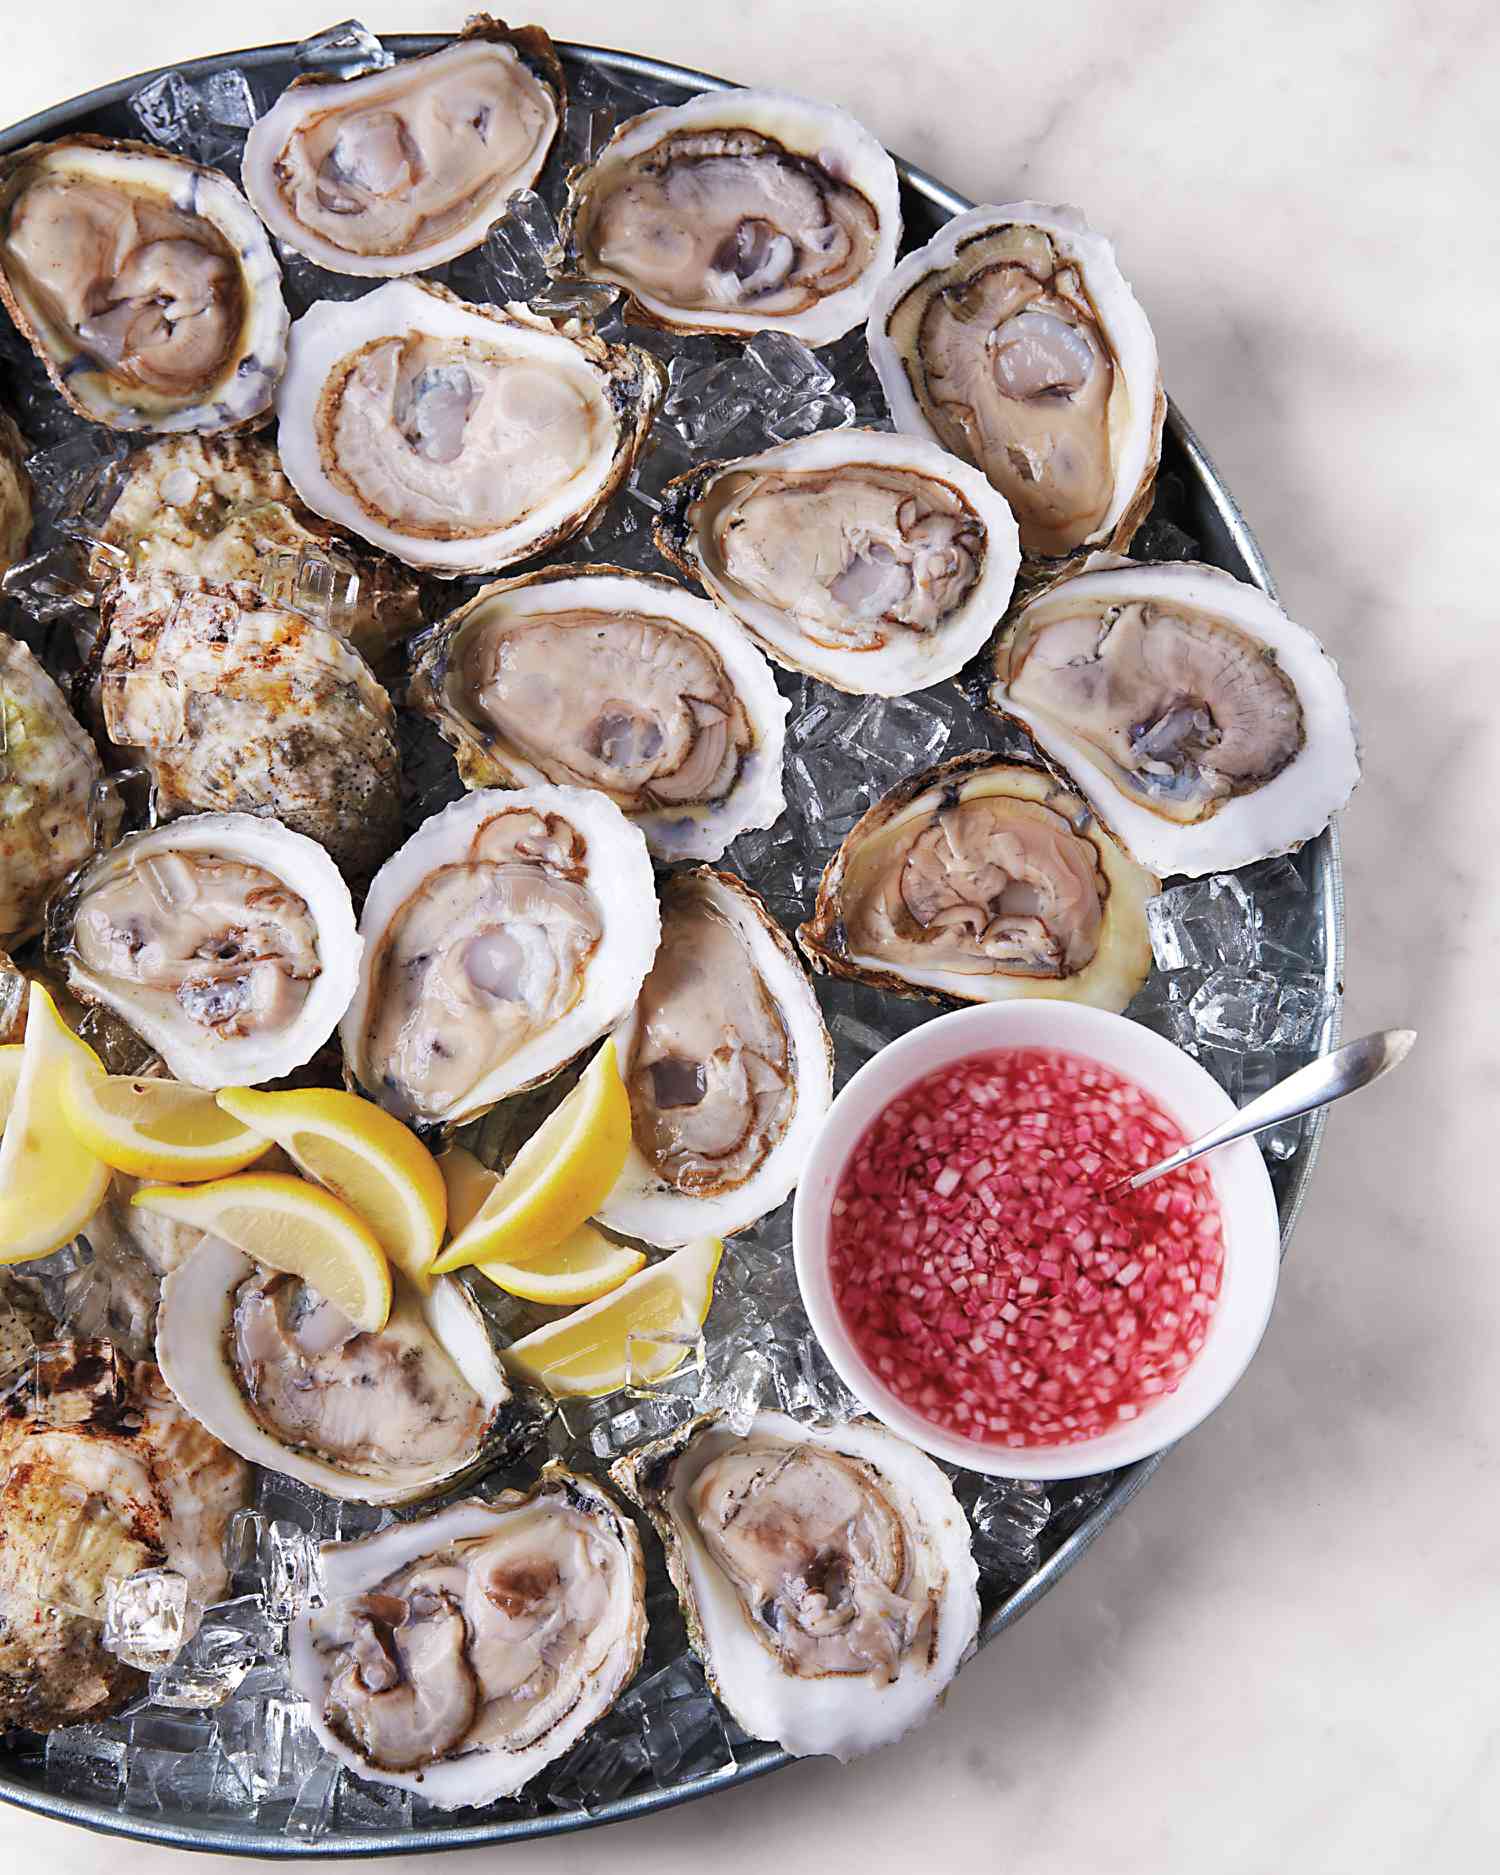 Aw Shucks: How to properly cook oysters at home - al.com